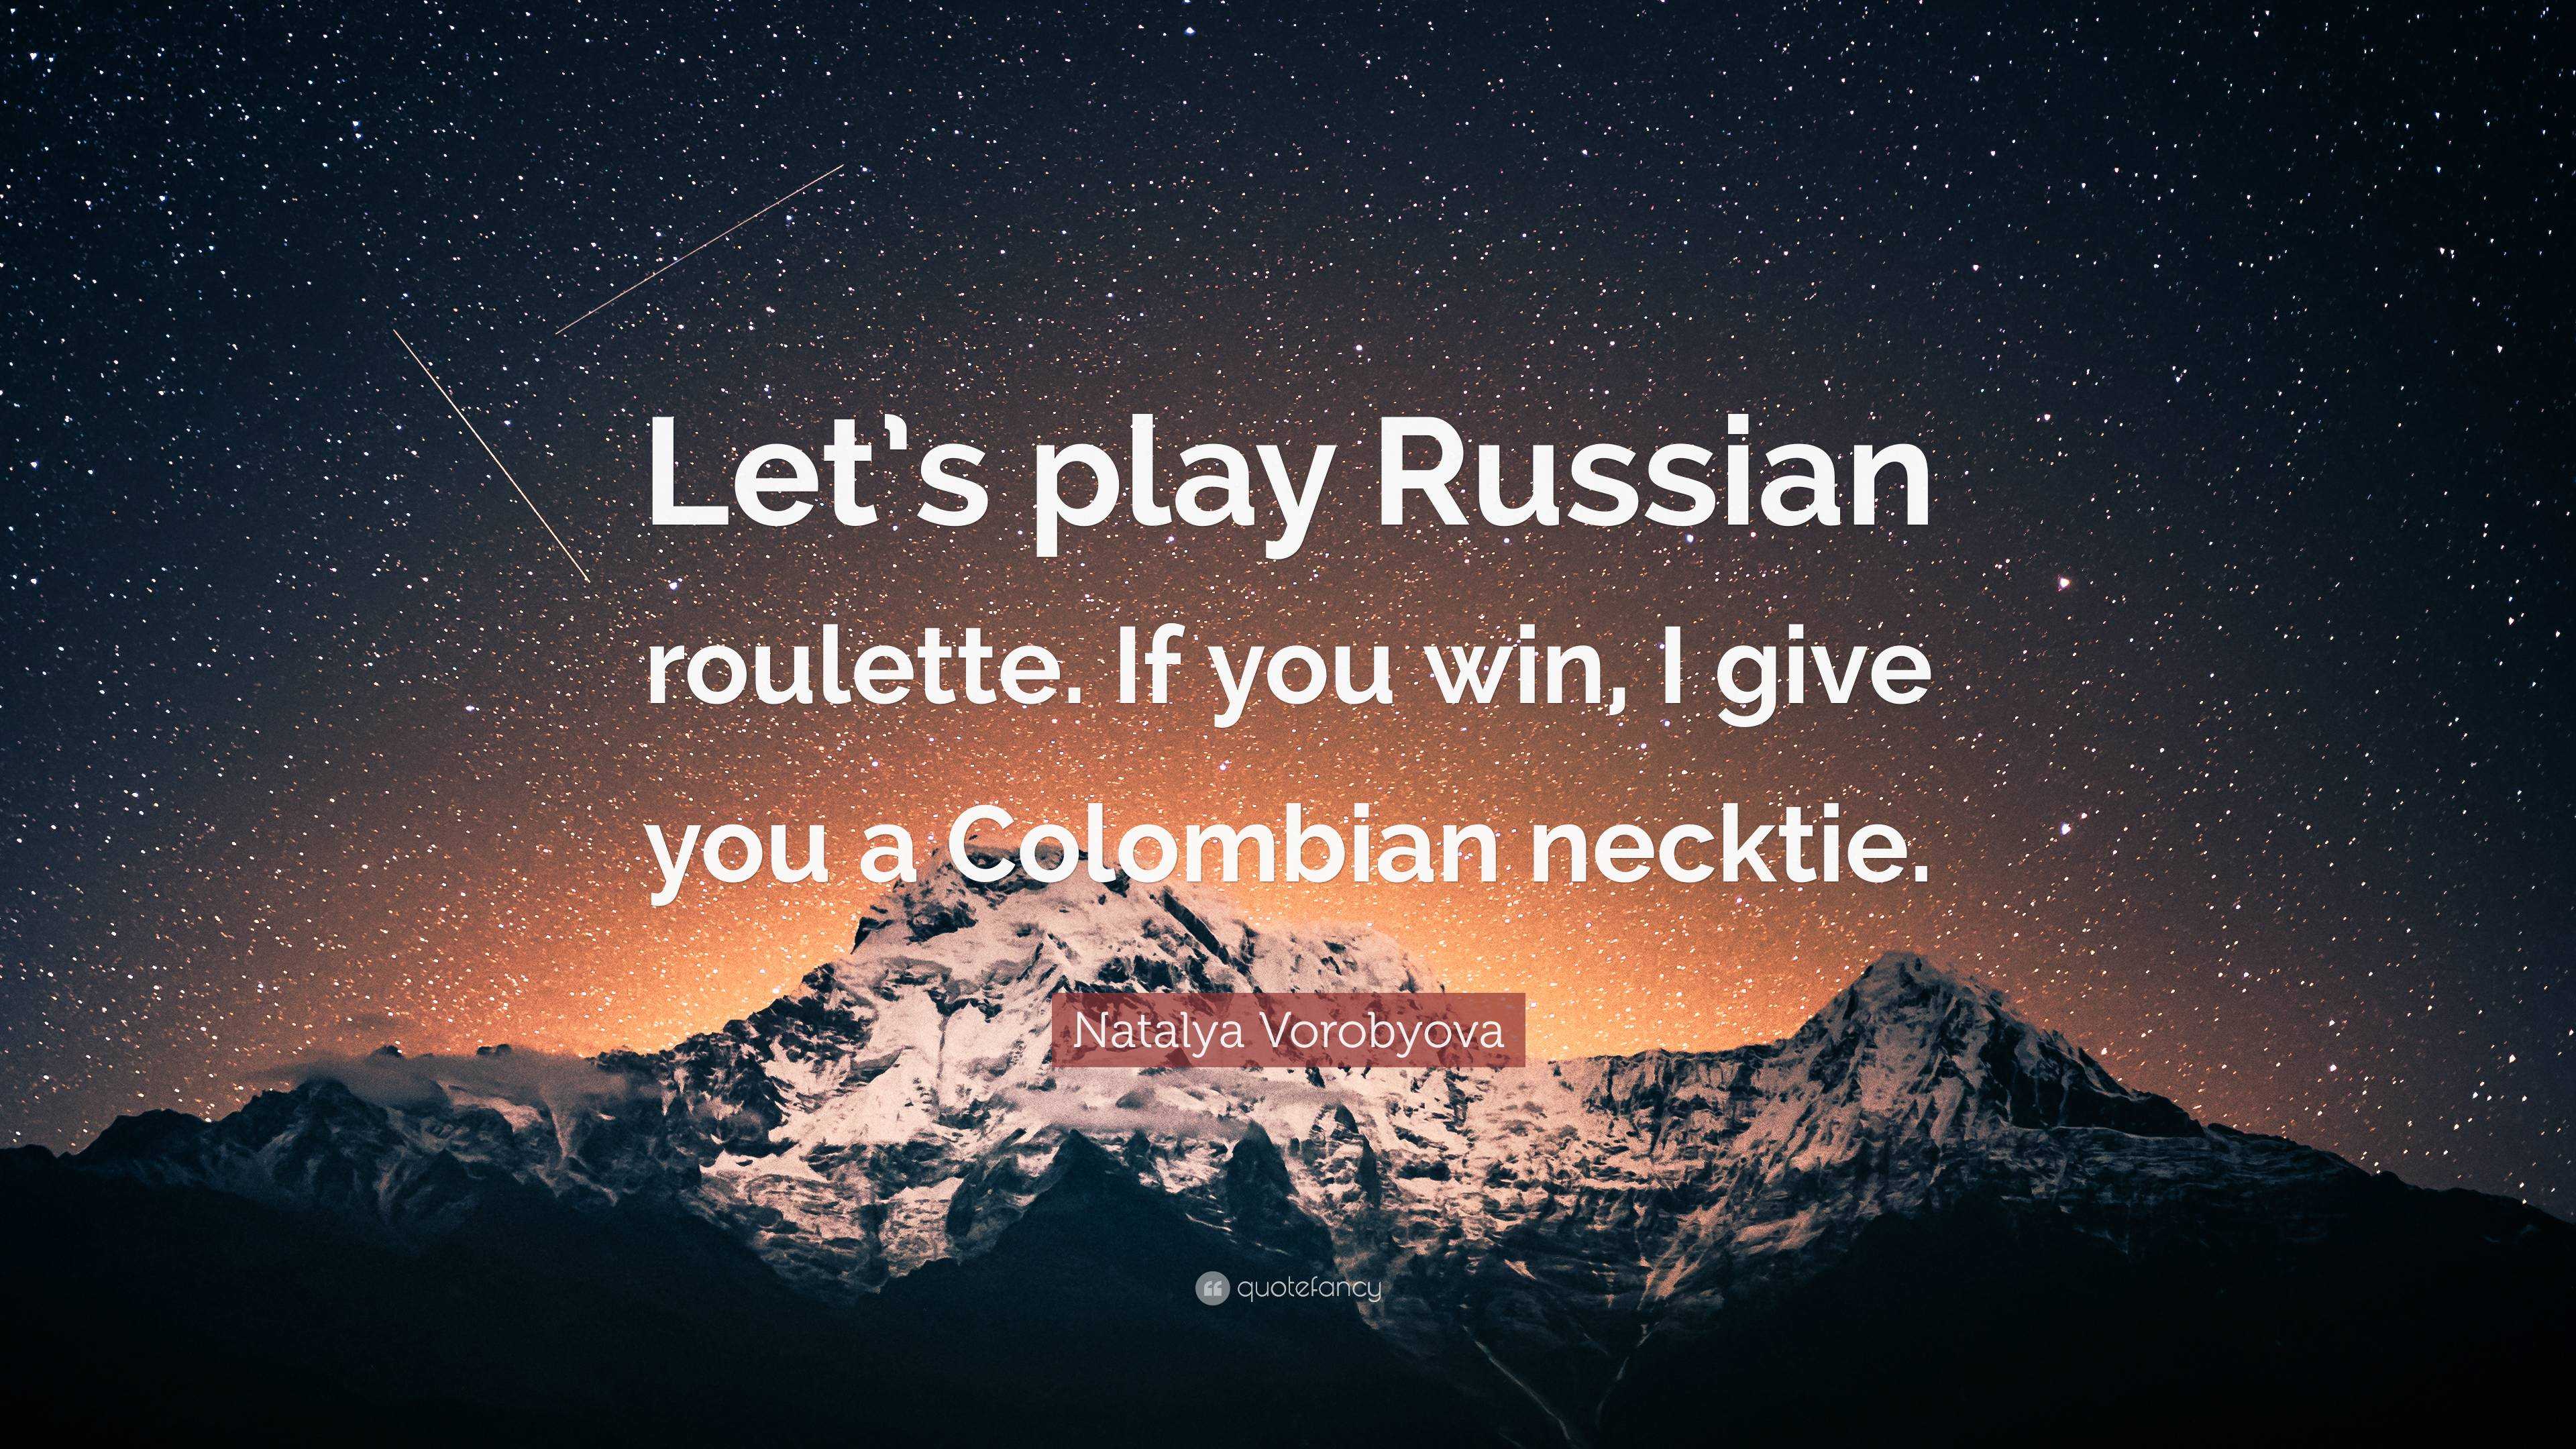 Winning at a Russian Roulette